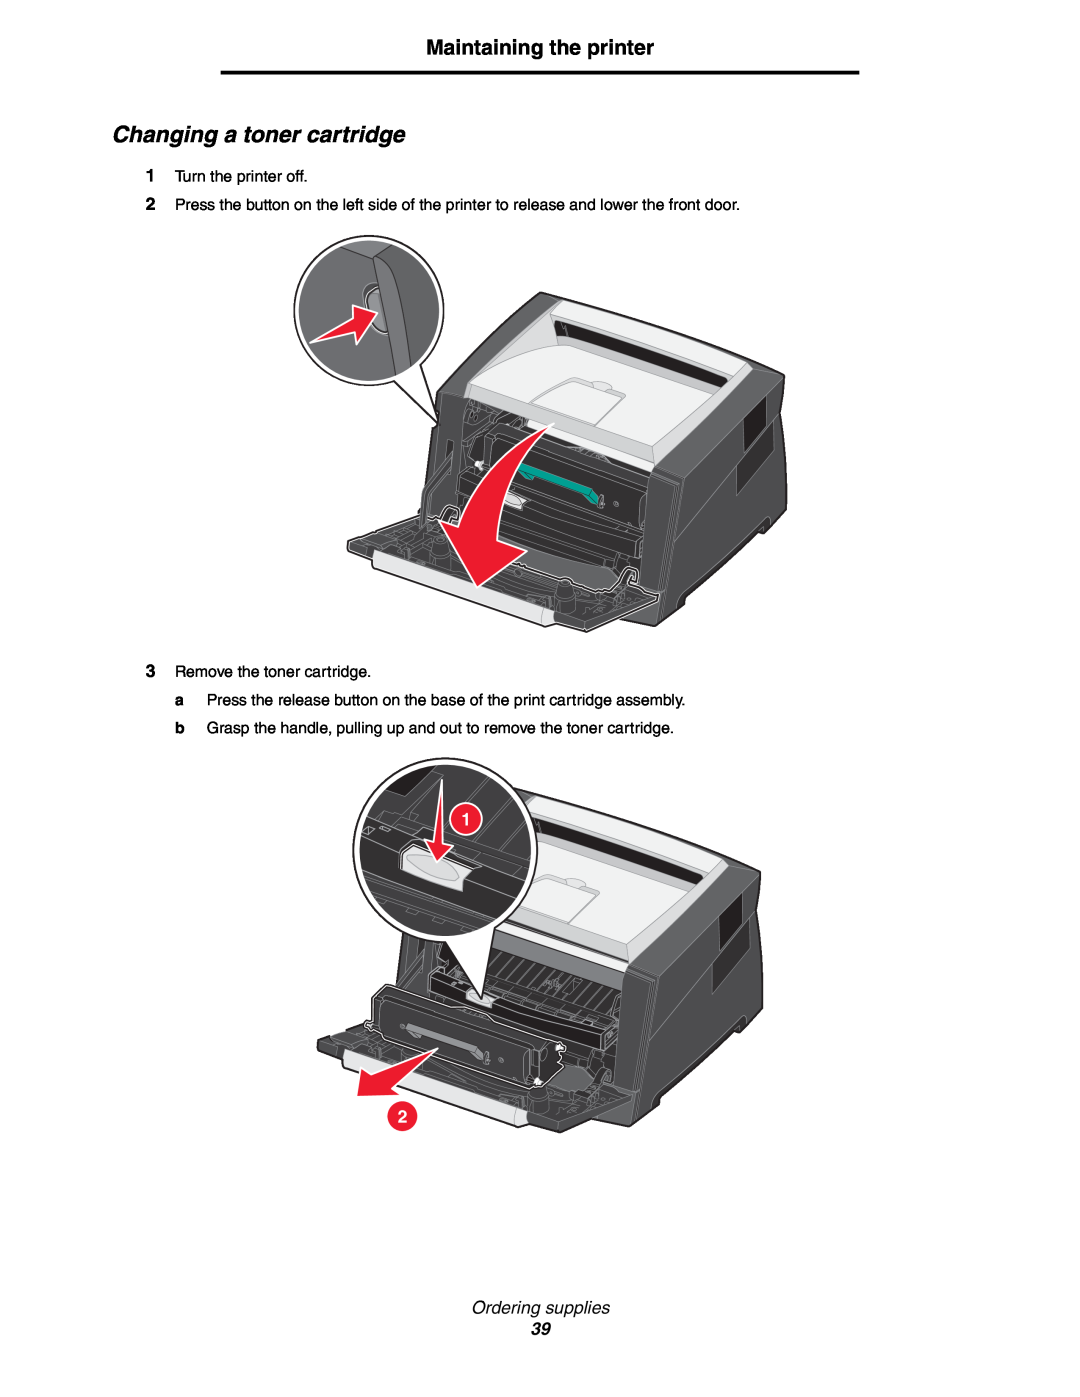 Lexmark 450dn manual Changing a toner cartridge, Maintaining the printer, Ordering supplies, Turn the printer off 